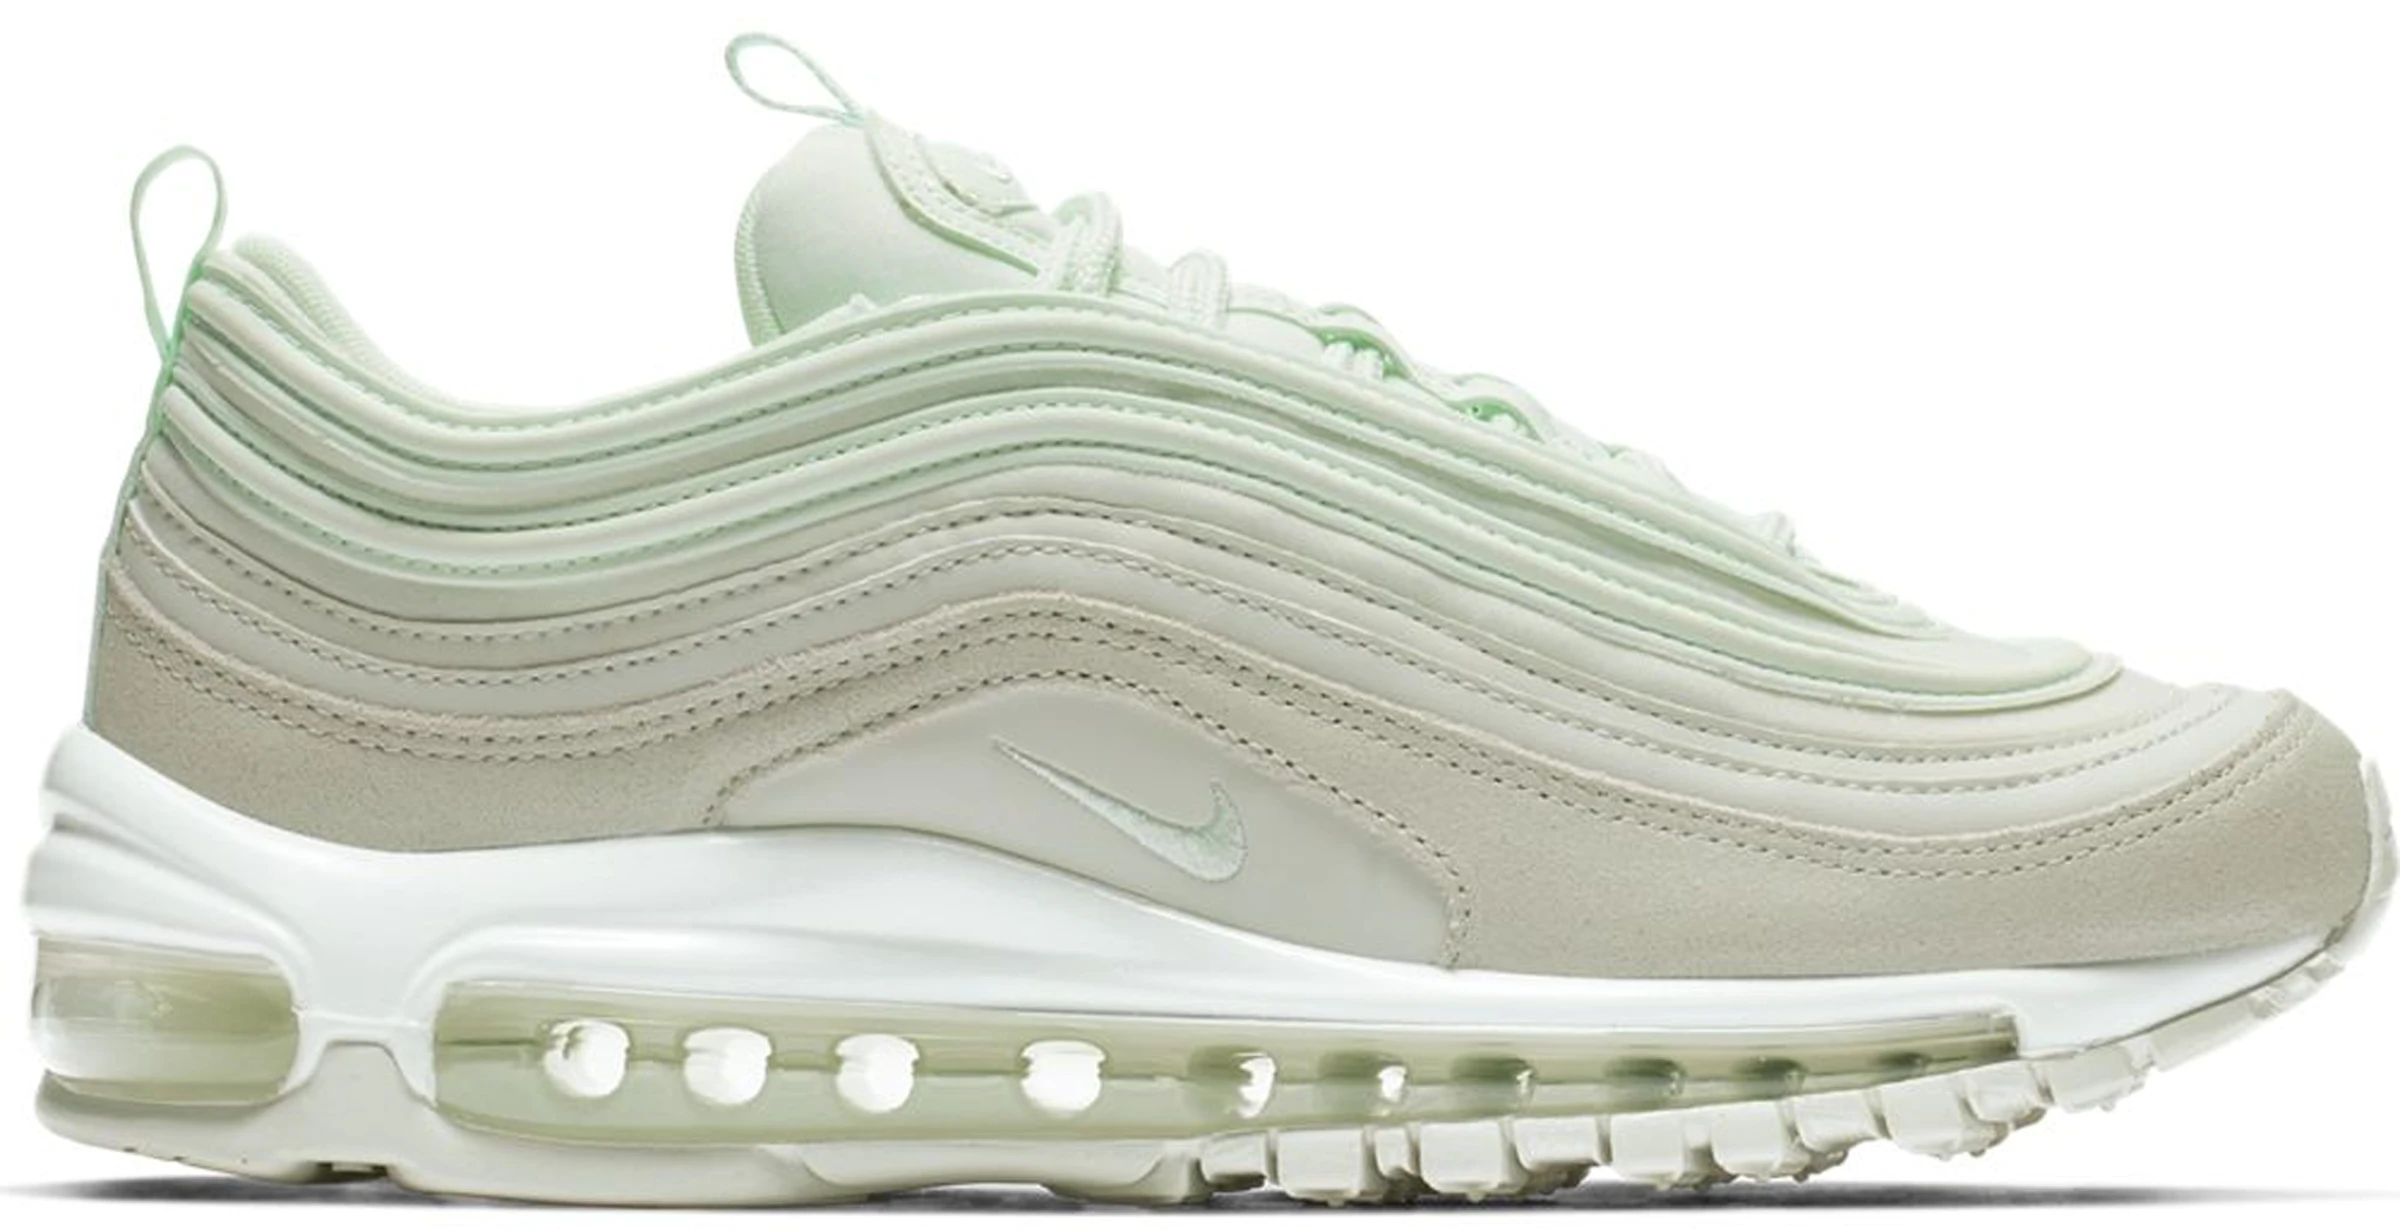 Nike Air Max 97 Barely Green (W) - 917646-301 -